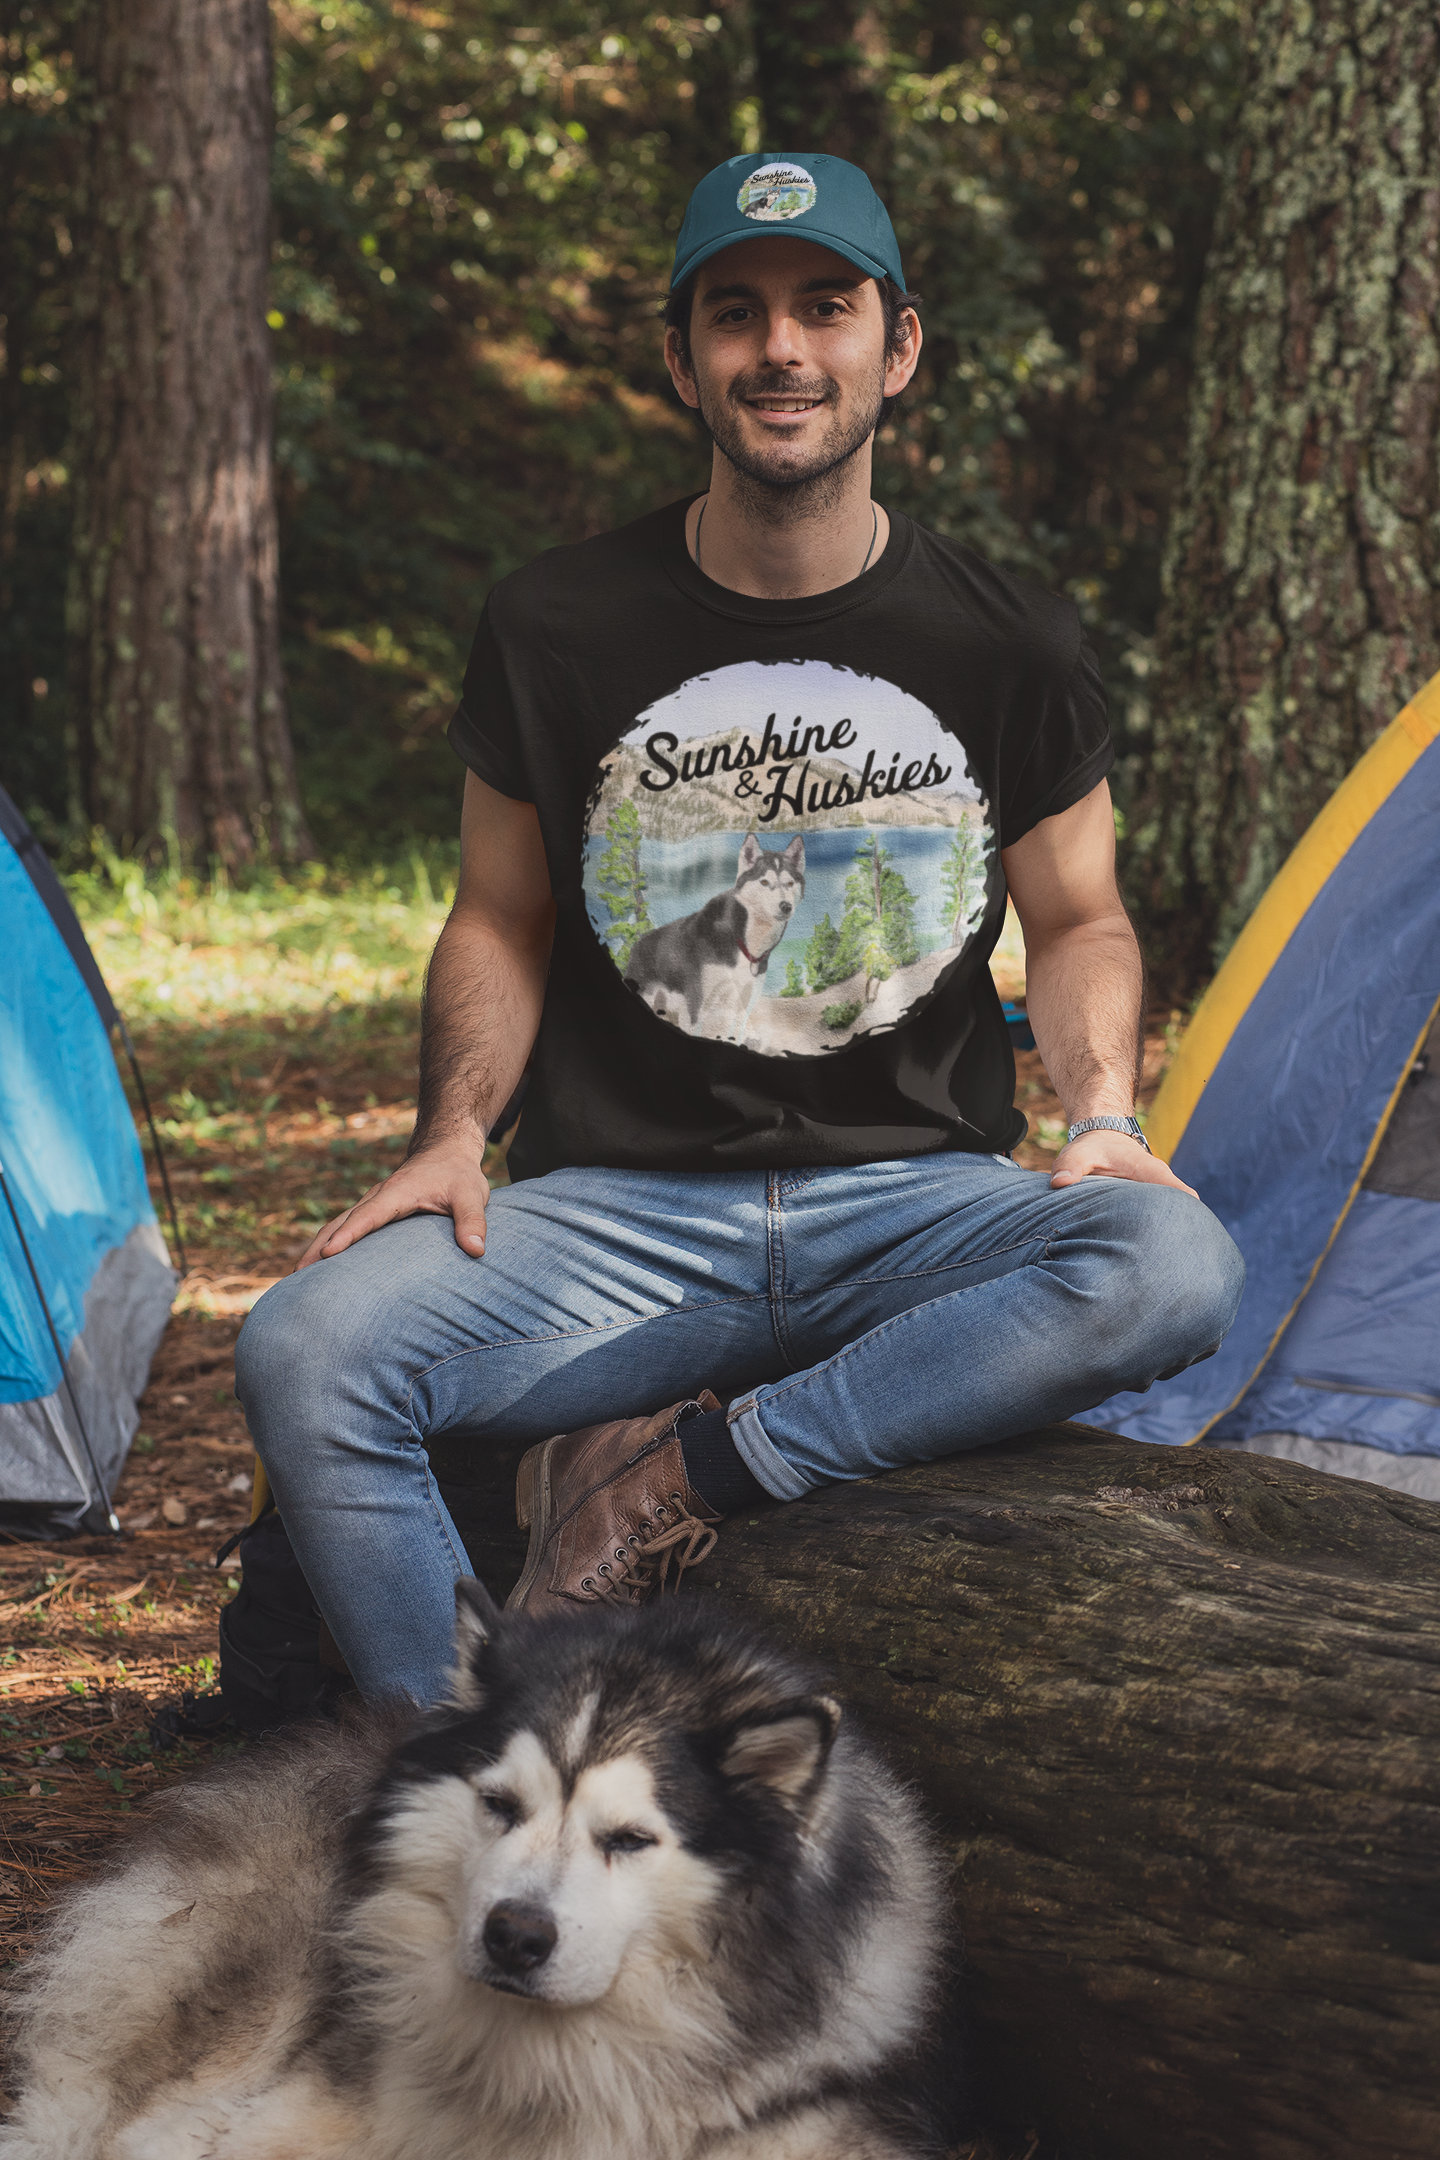 Sled Dog Siberian Husky T-Shirt Wanderlust Explore More Tee Hiking with Dog Shirt Gift for Camping Lover Grey Husky Great Outdoors Shirt